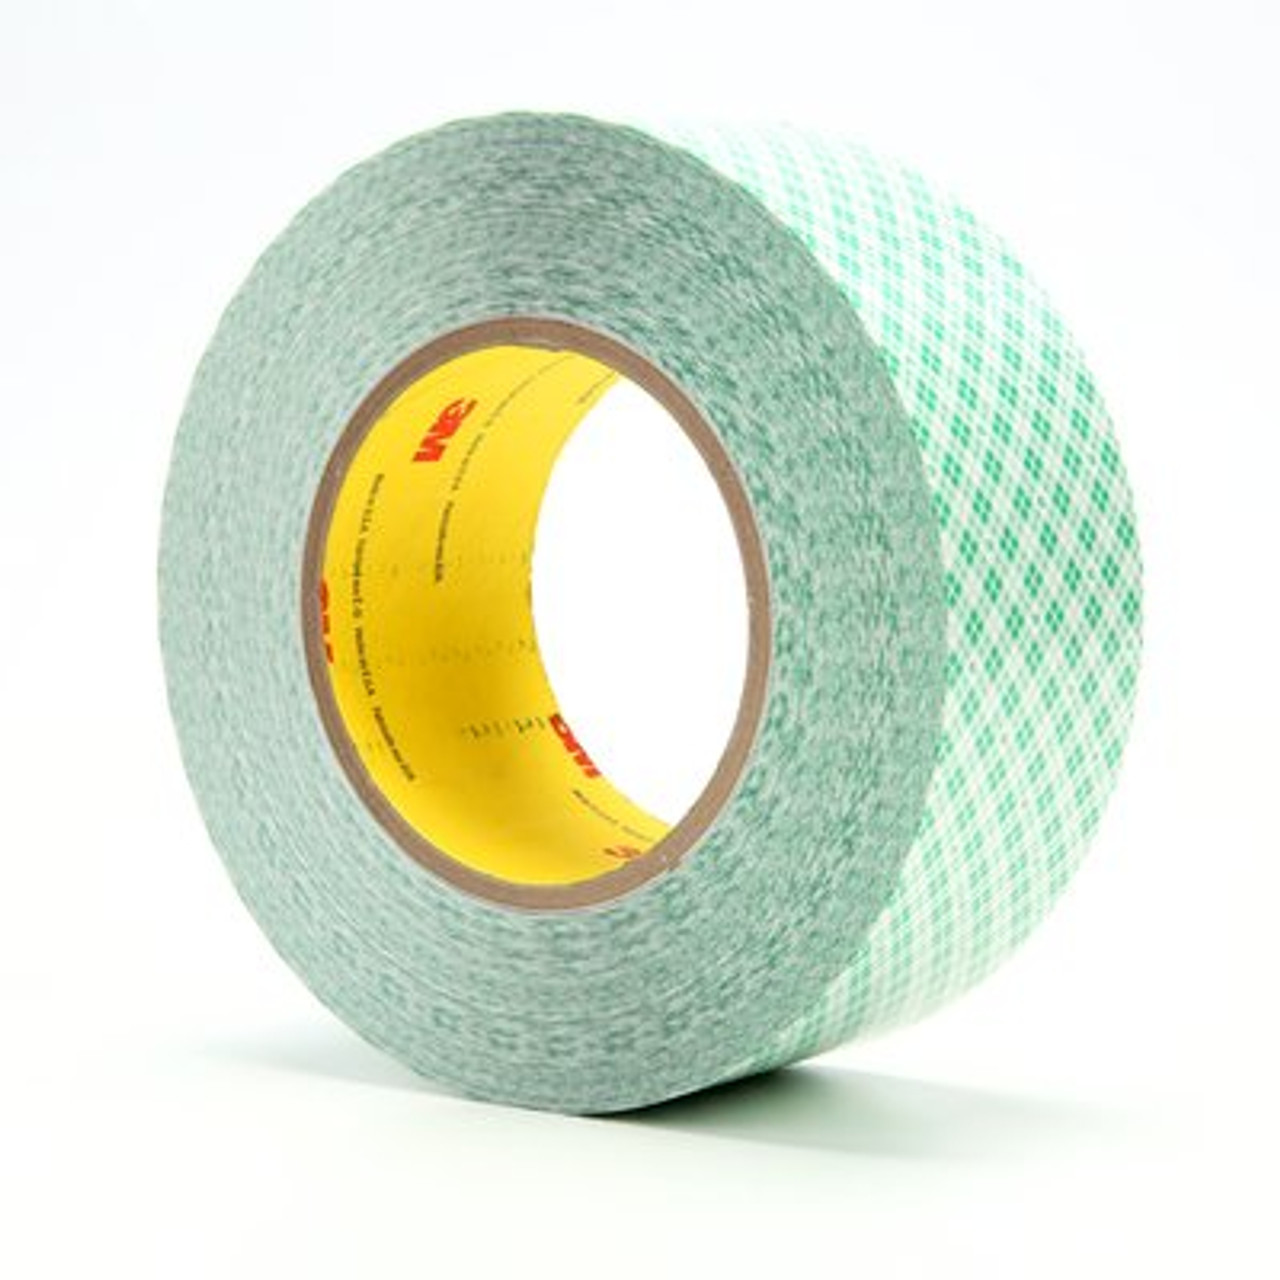 3M™ Double Coated Film Tape 9589 White, 2 in x 36 yd 9.0 mil